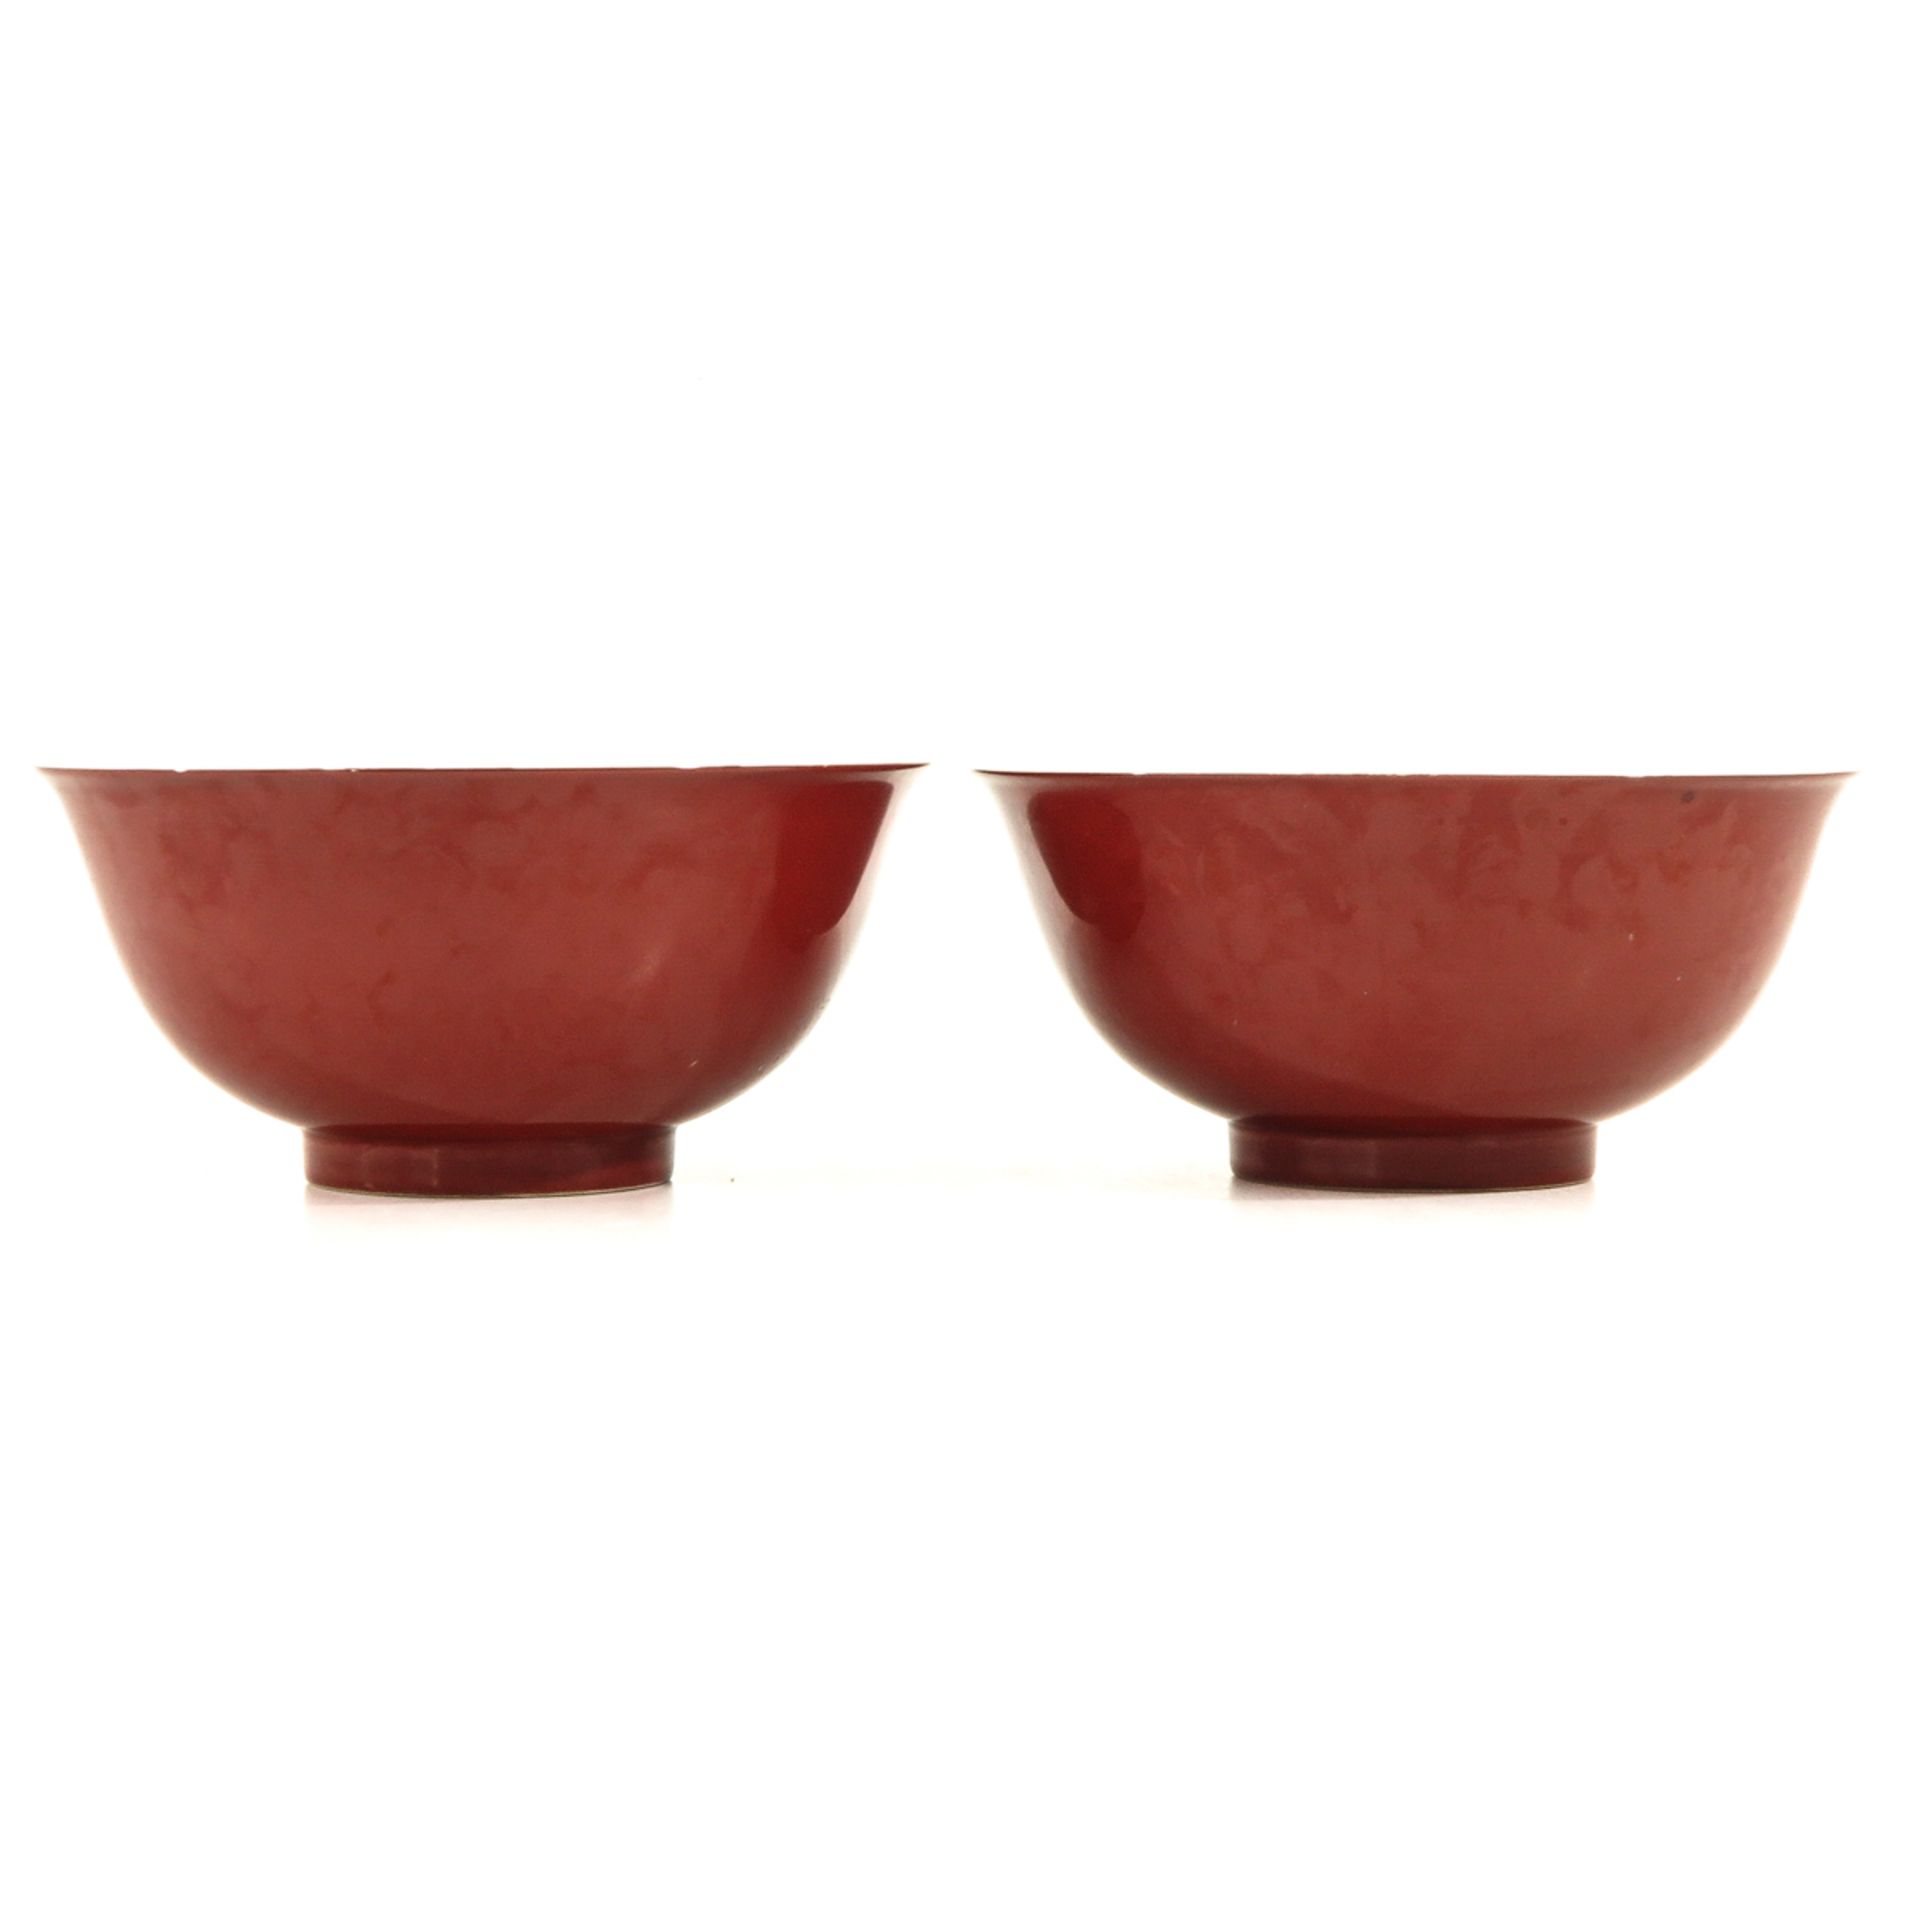 A Pair of Famille Rose Bowls - Image 3 of 10